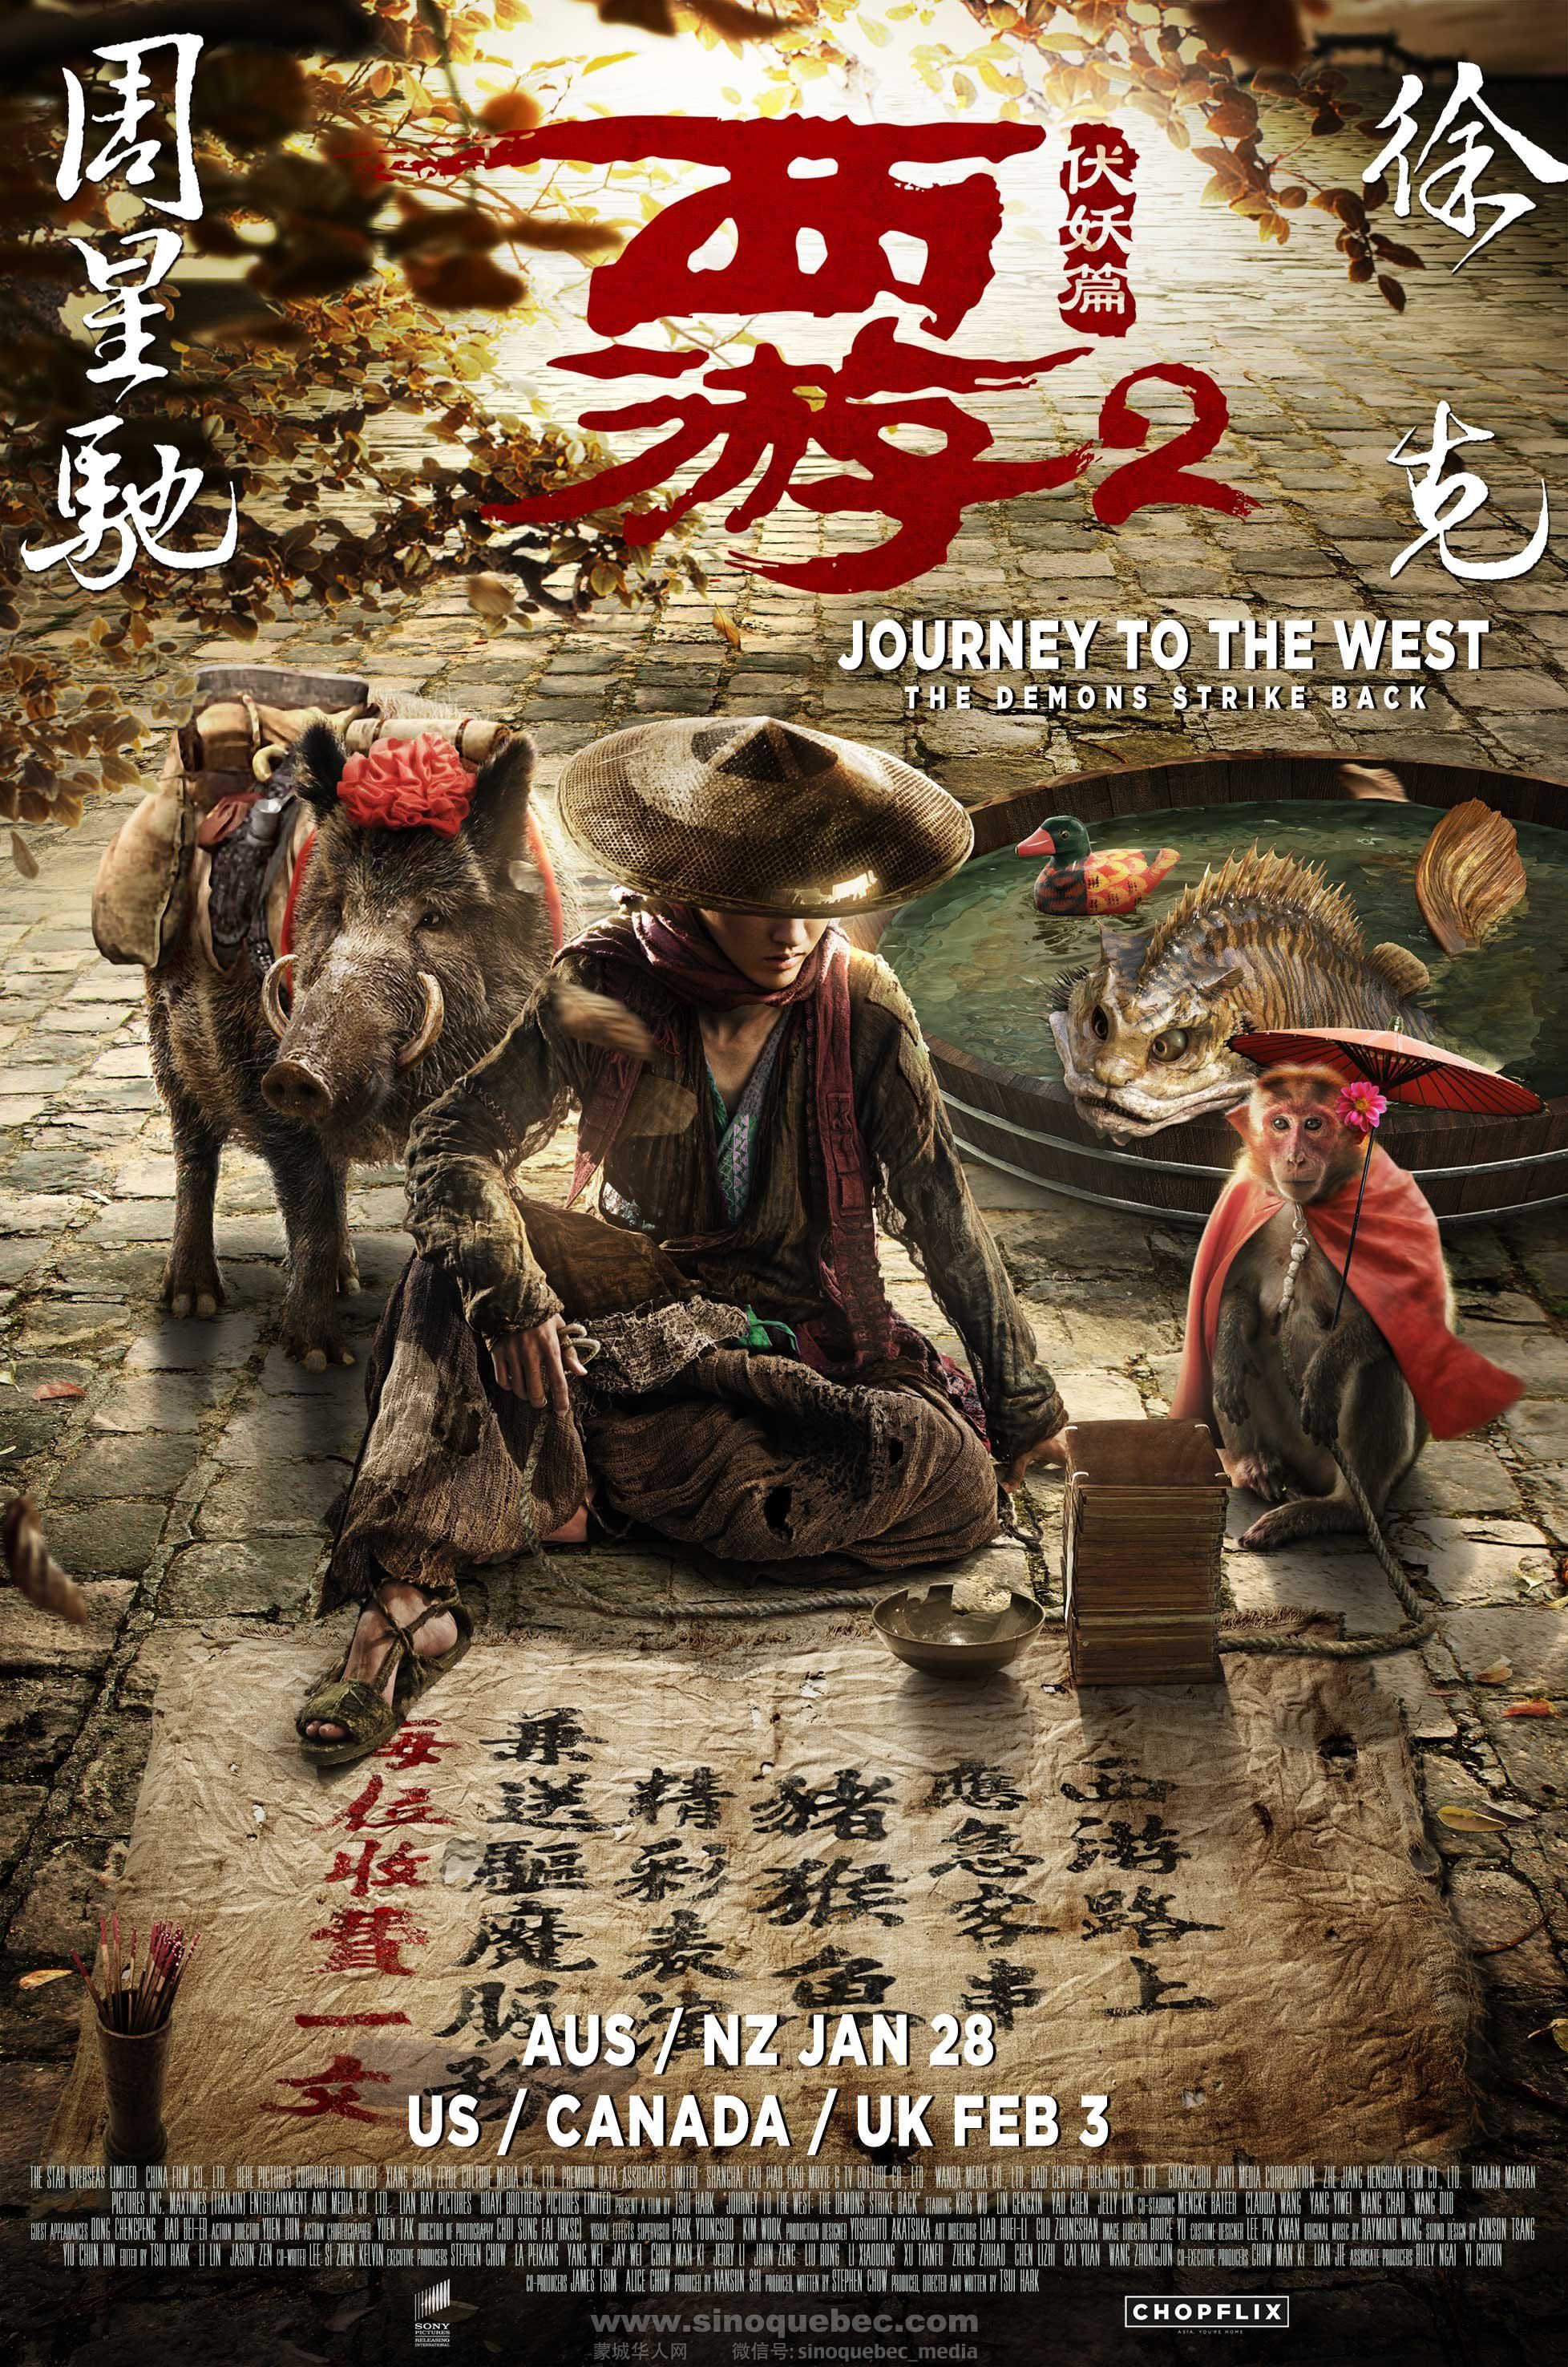 Journey_To_The_West_2_Poster_WEB_27X41_72dpi.jpg